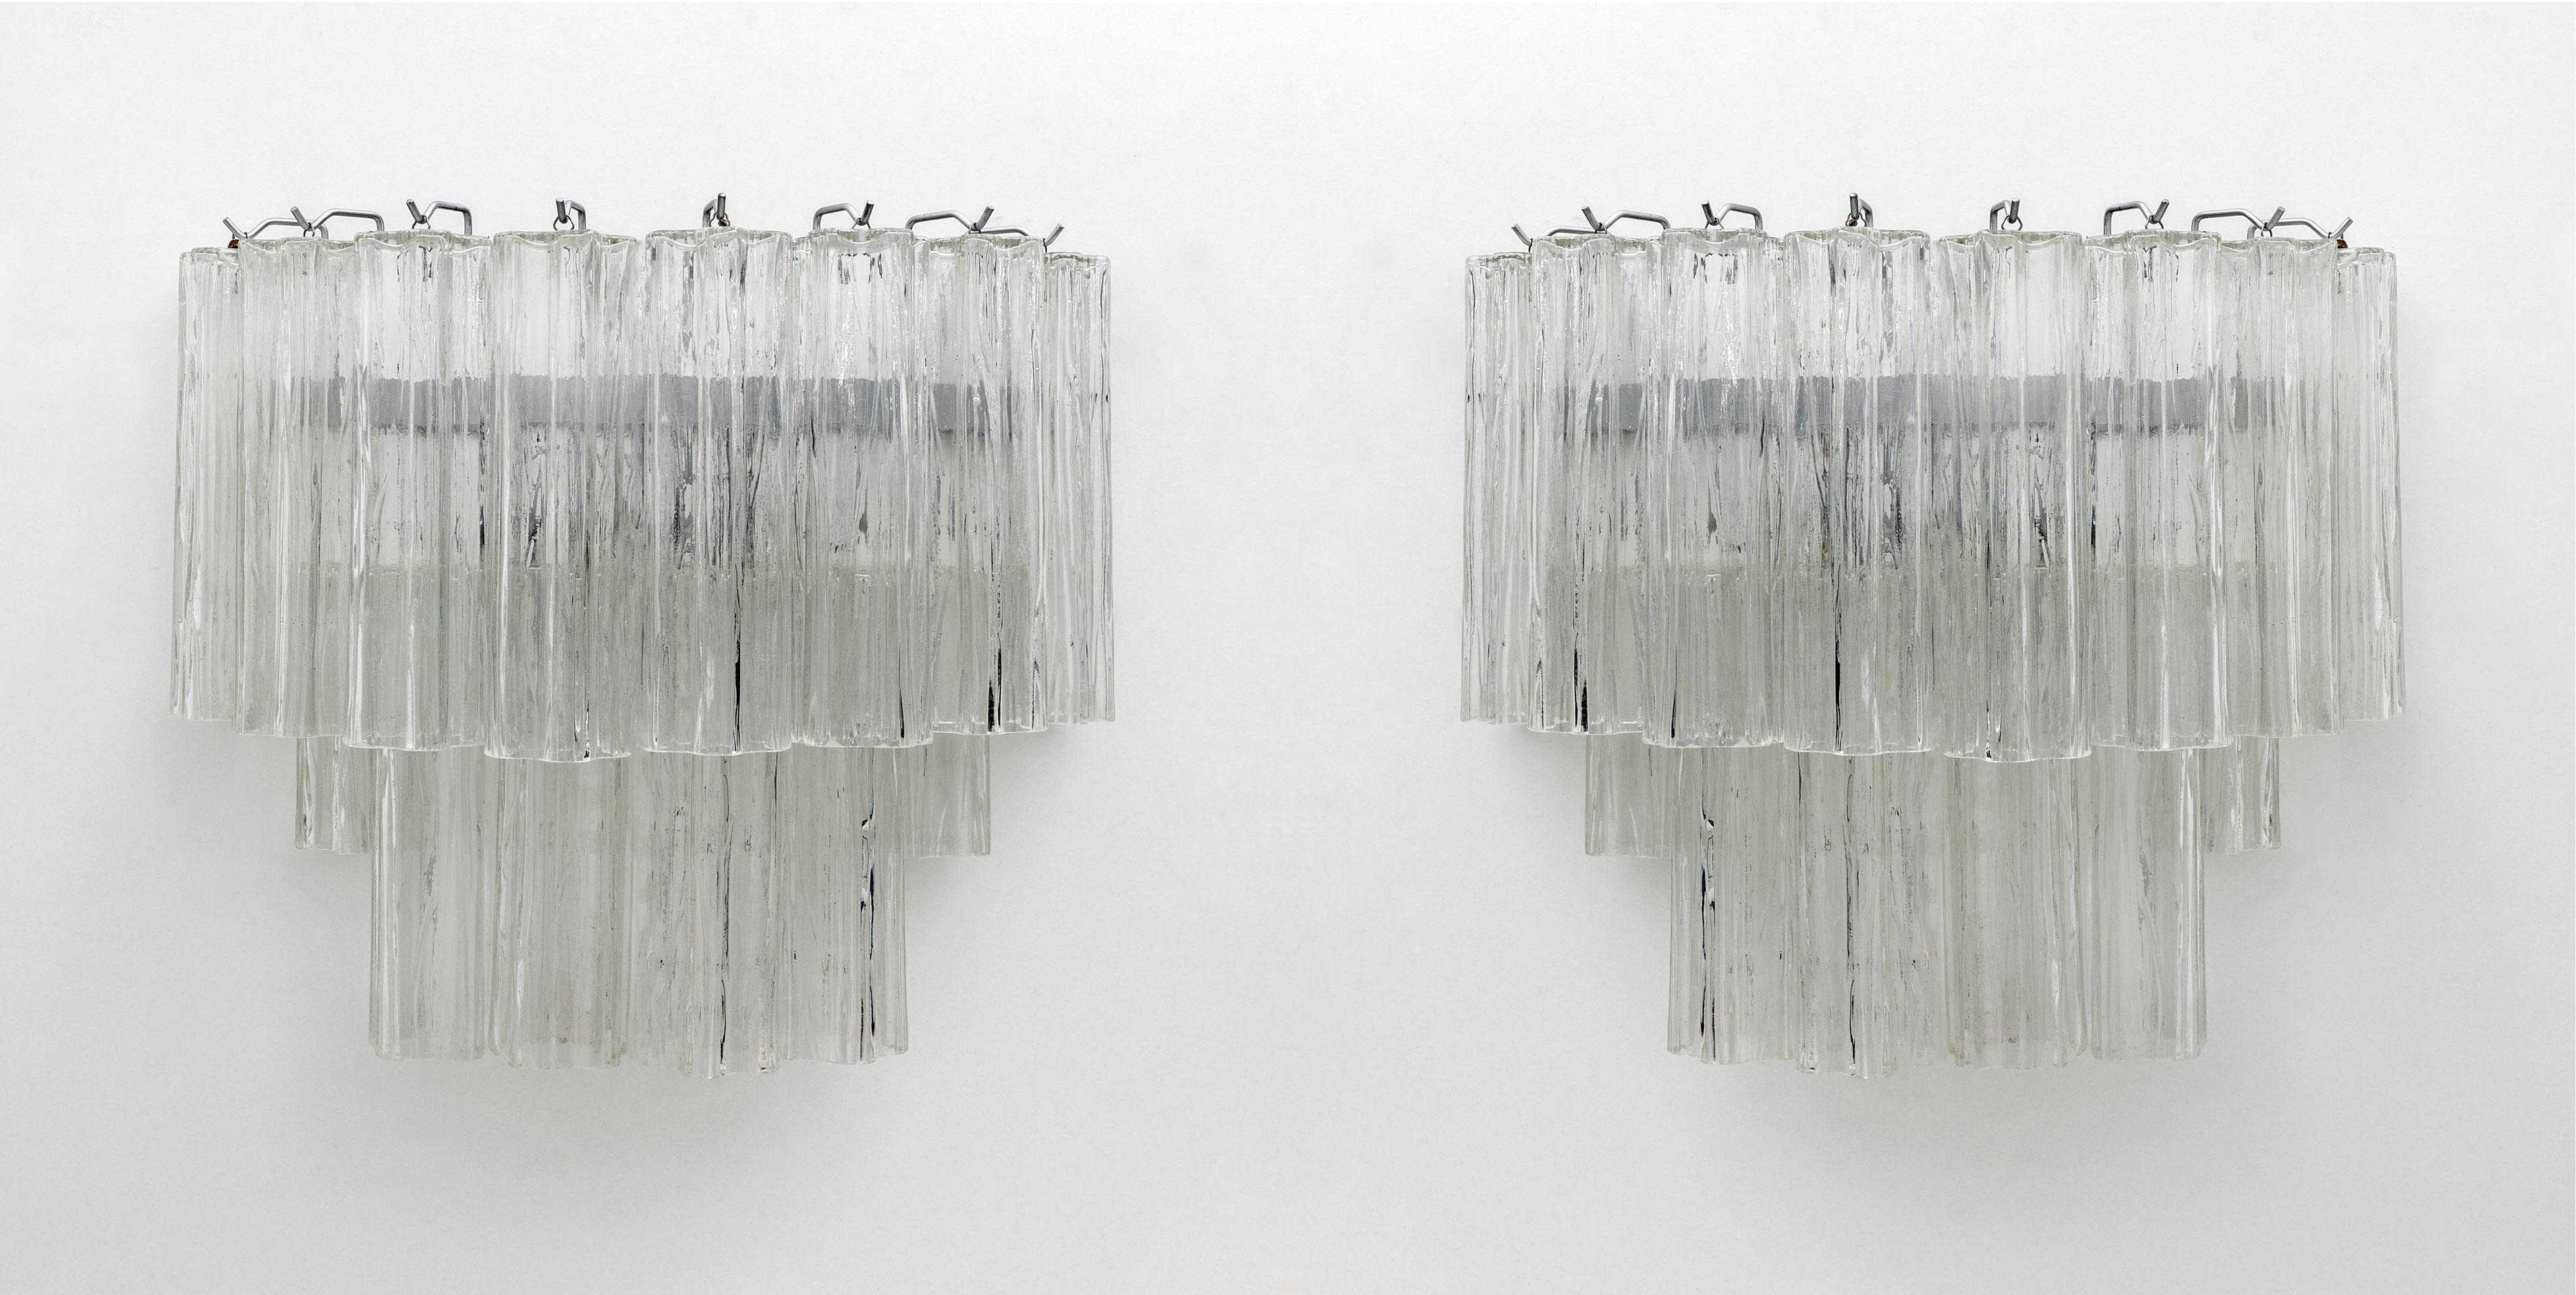 Toni Zuccheri for Venini 1970s, pair of wall lamps each composed of 14 Murano glass trunks.
Rewired again, each lamp has two E14 lamp holders, which can also be used in the USA with E12 socket bulbs.
The structure is in chrome painted metal